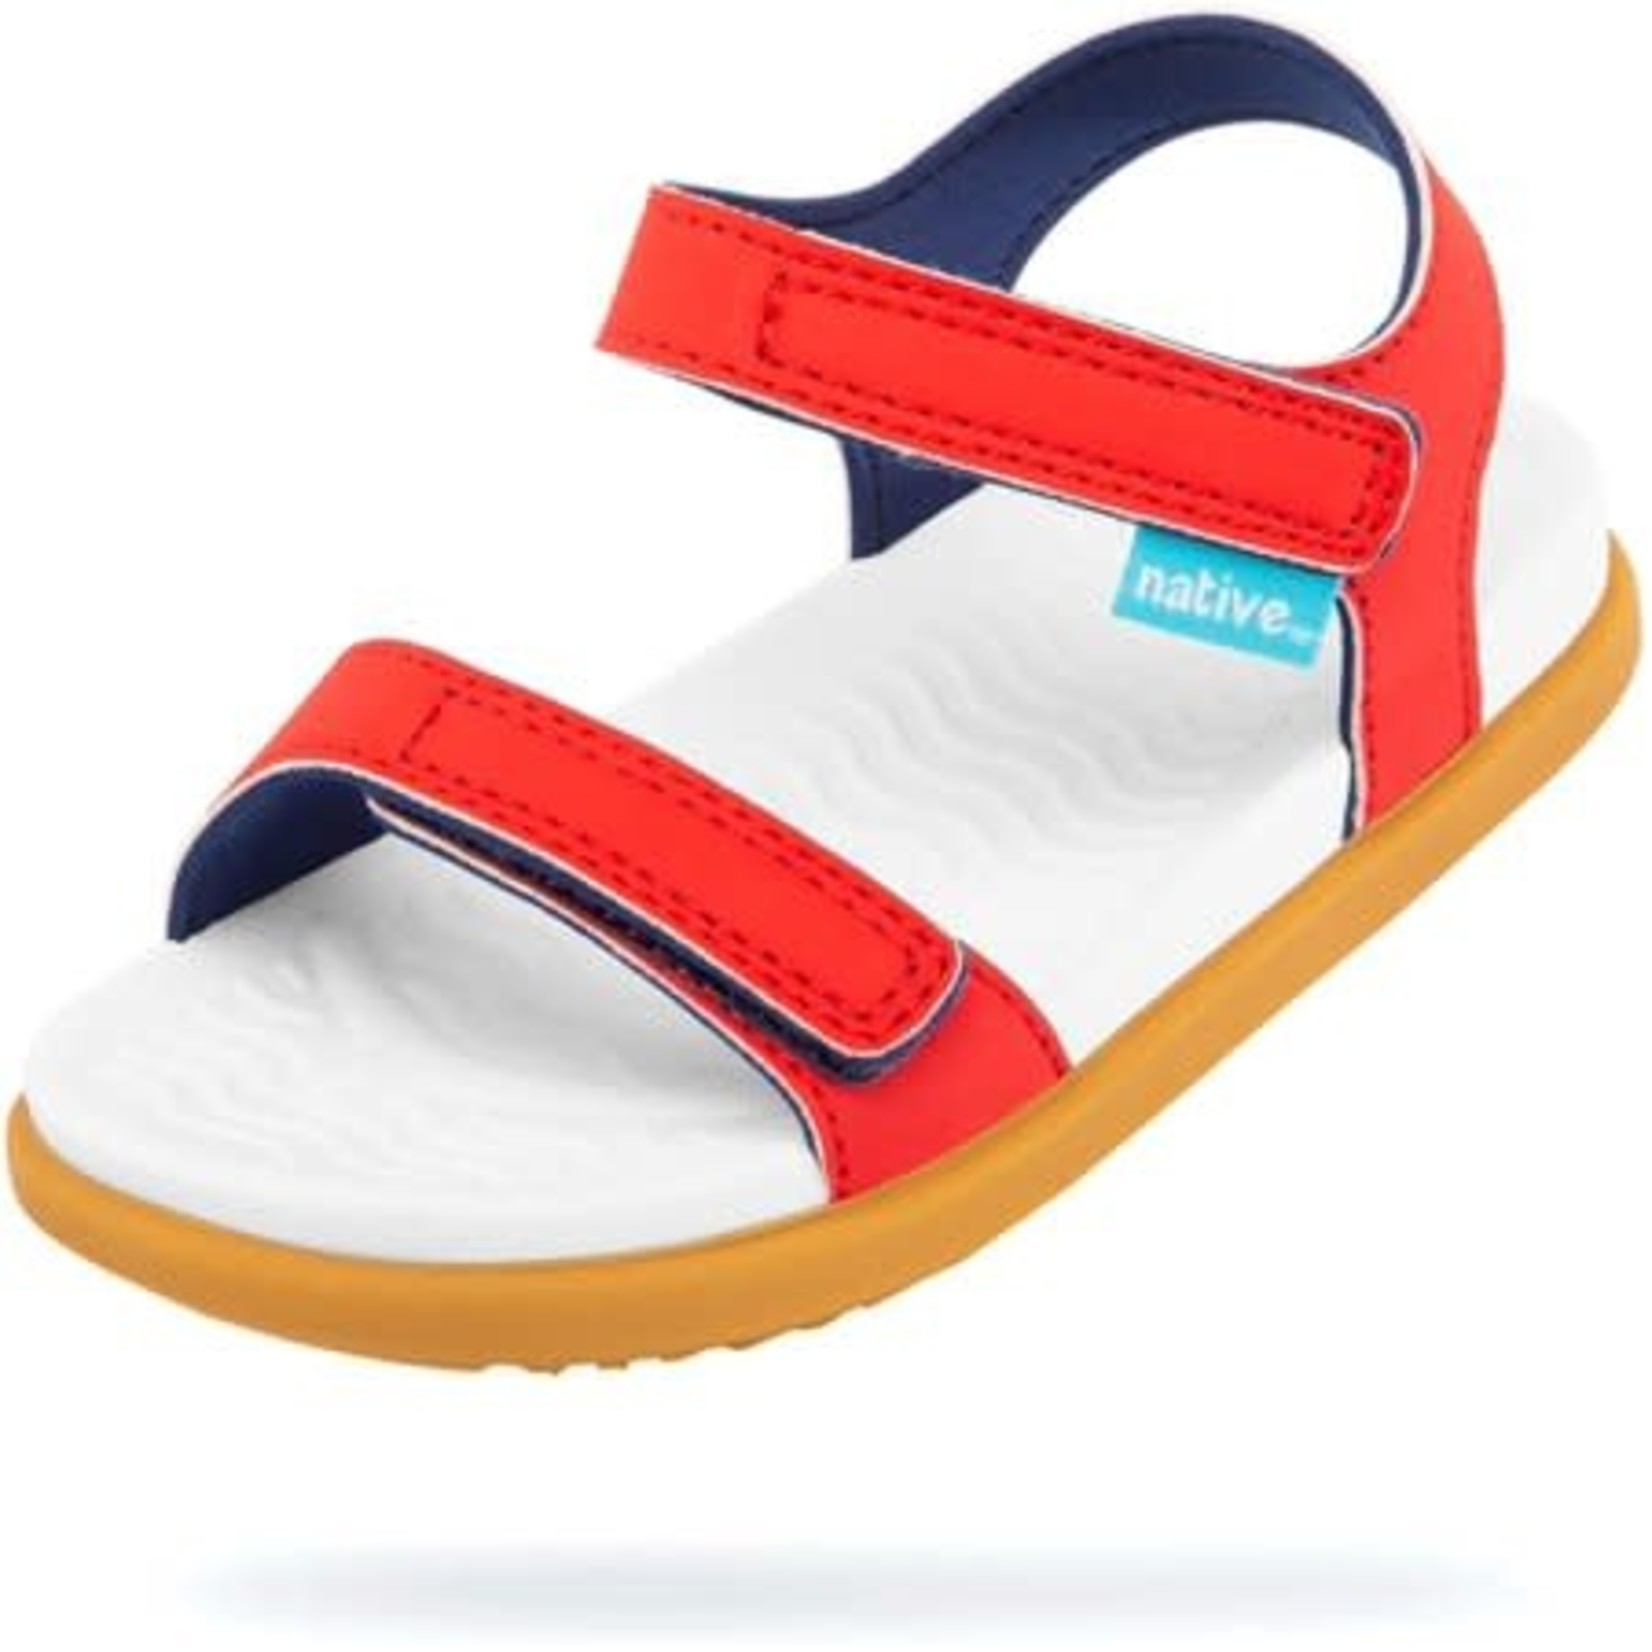 Native NATIVE - Water-resistant open toe sandals 'Torch Red/ Shell White/ Toffee Brown'